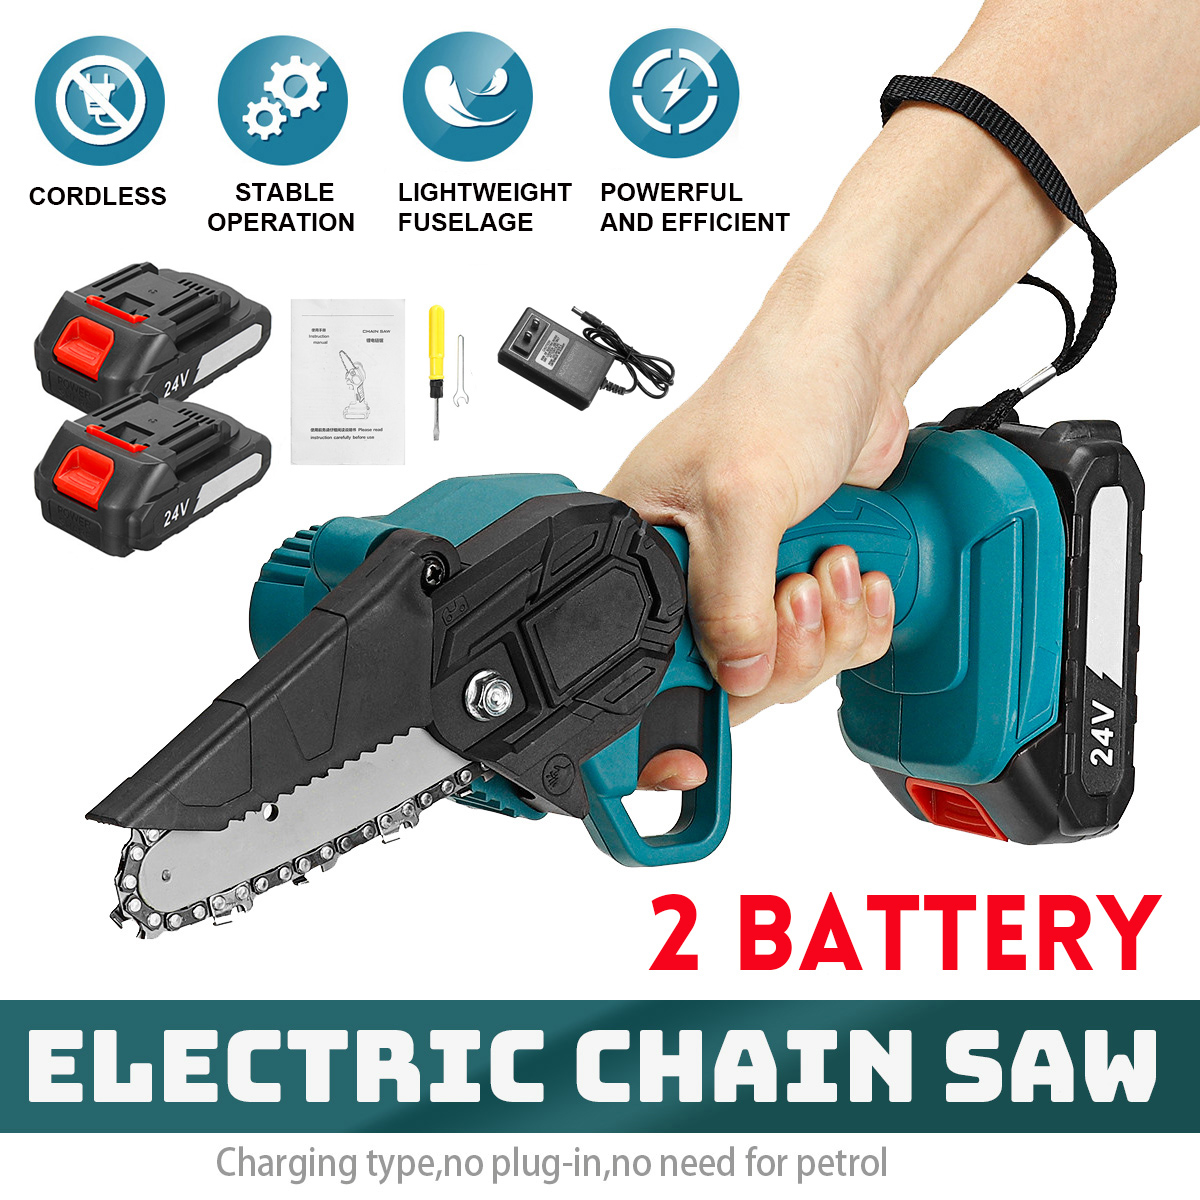 4-Inch-Electric-Chainsaws-Rechargeable-Portable-Chain-Saw-Woodworking-Tool-Wood-Cutter-W-12-Battery-1860314-4